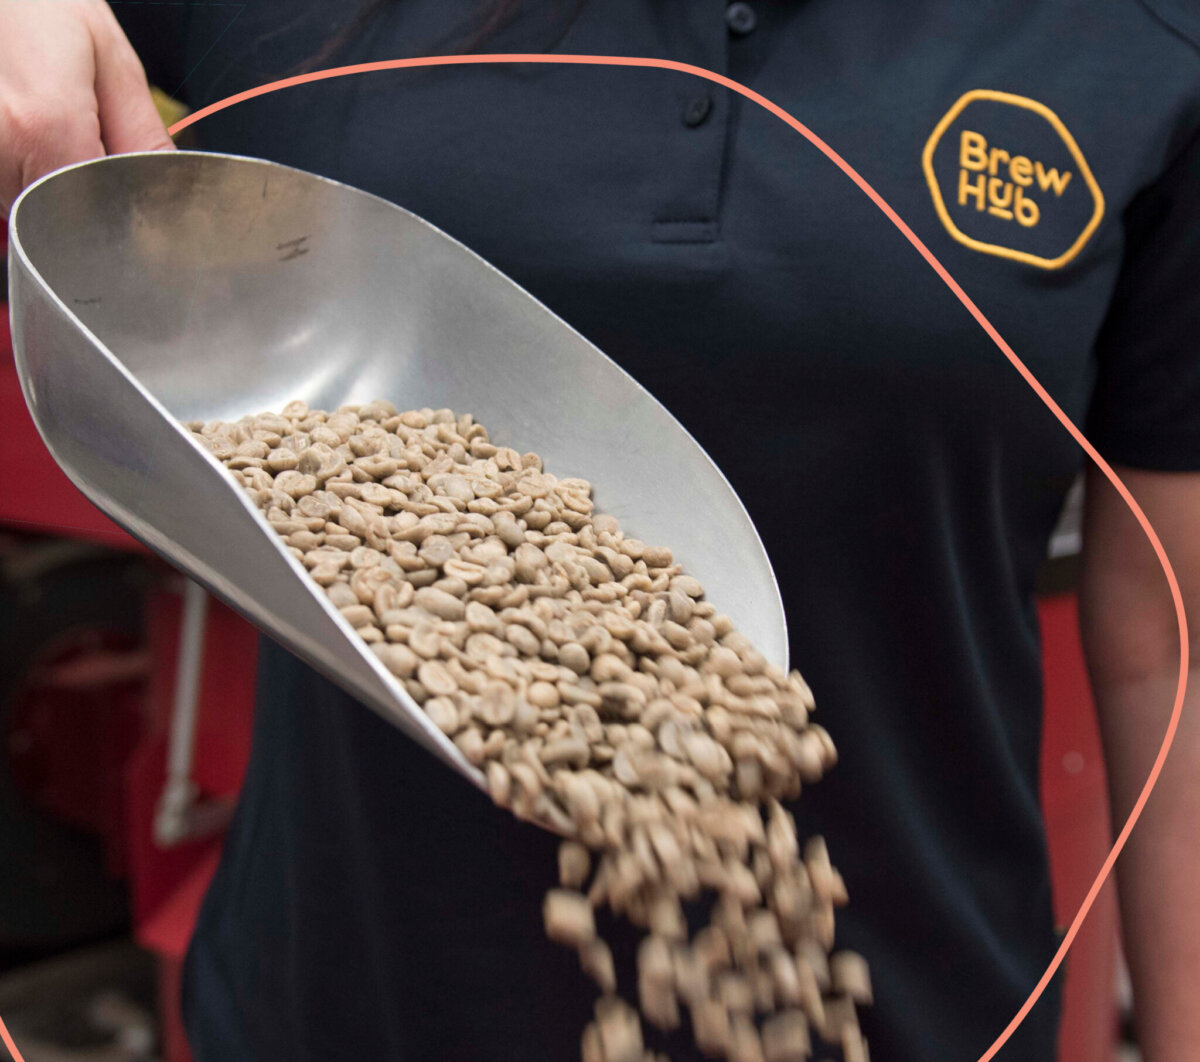 BrewHub employee pouring coffee grains from scoop